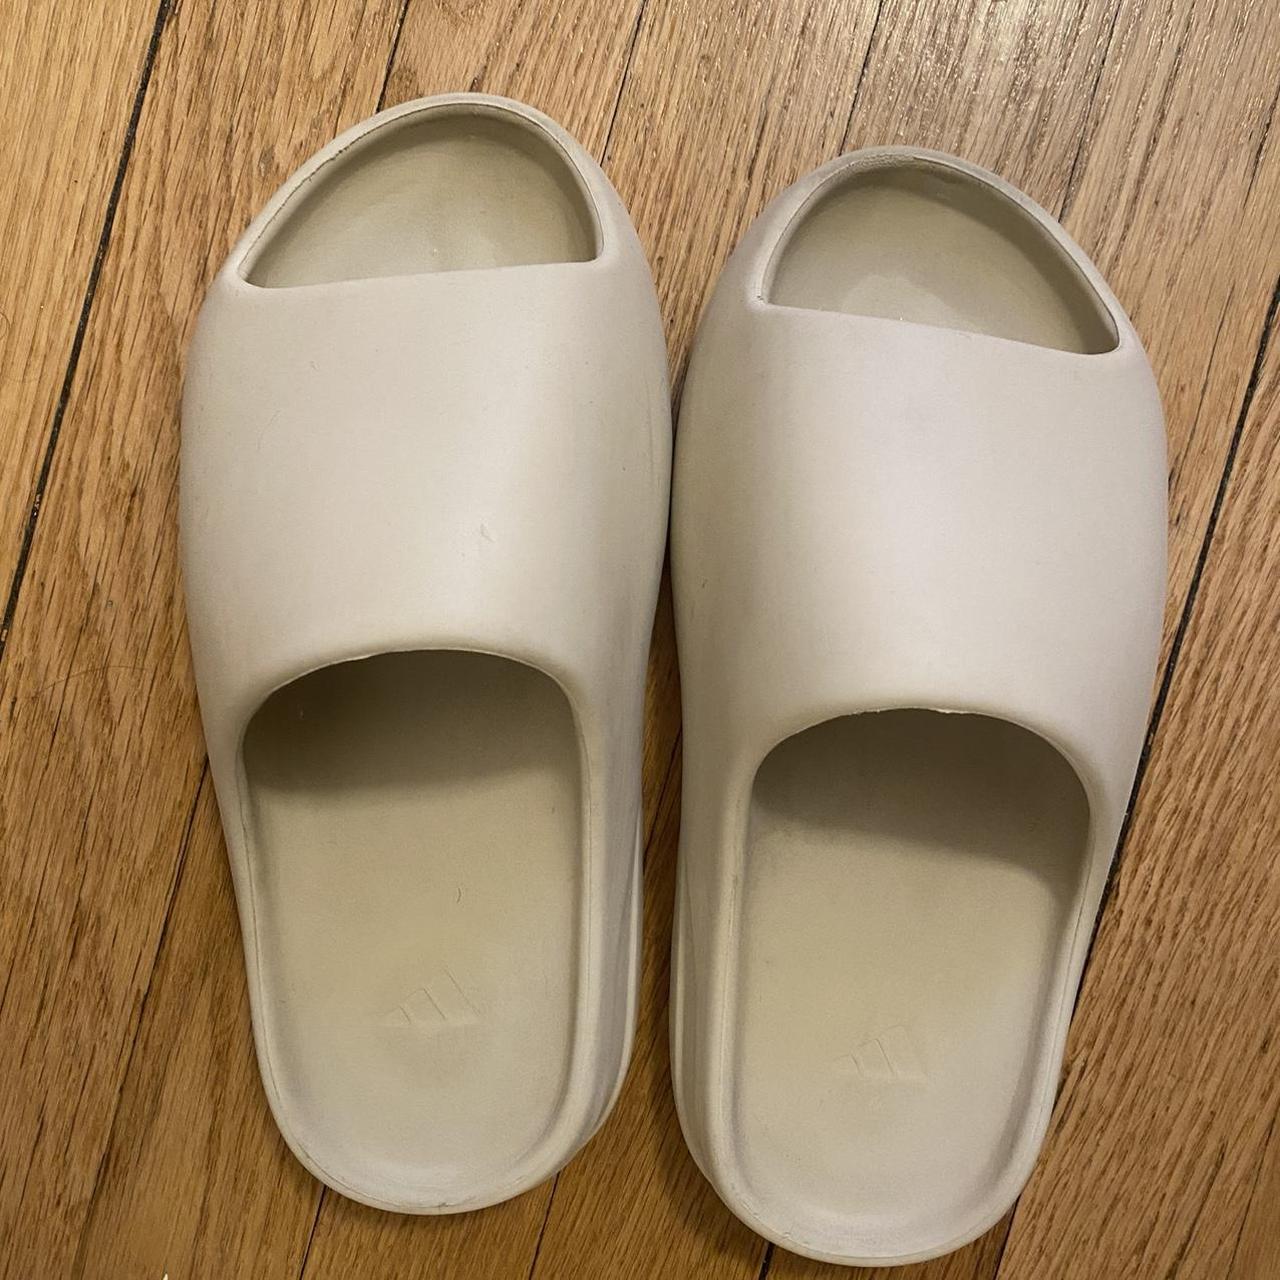 Bone adidas Yeezy slides. Lightly used, they are a... - Depop